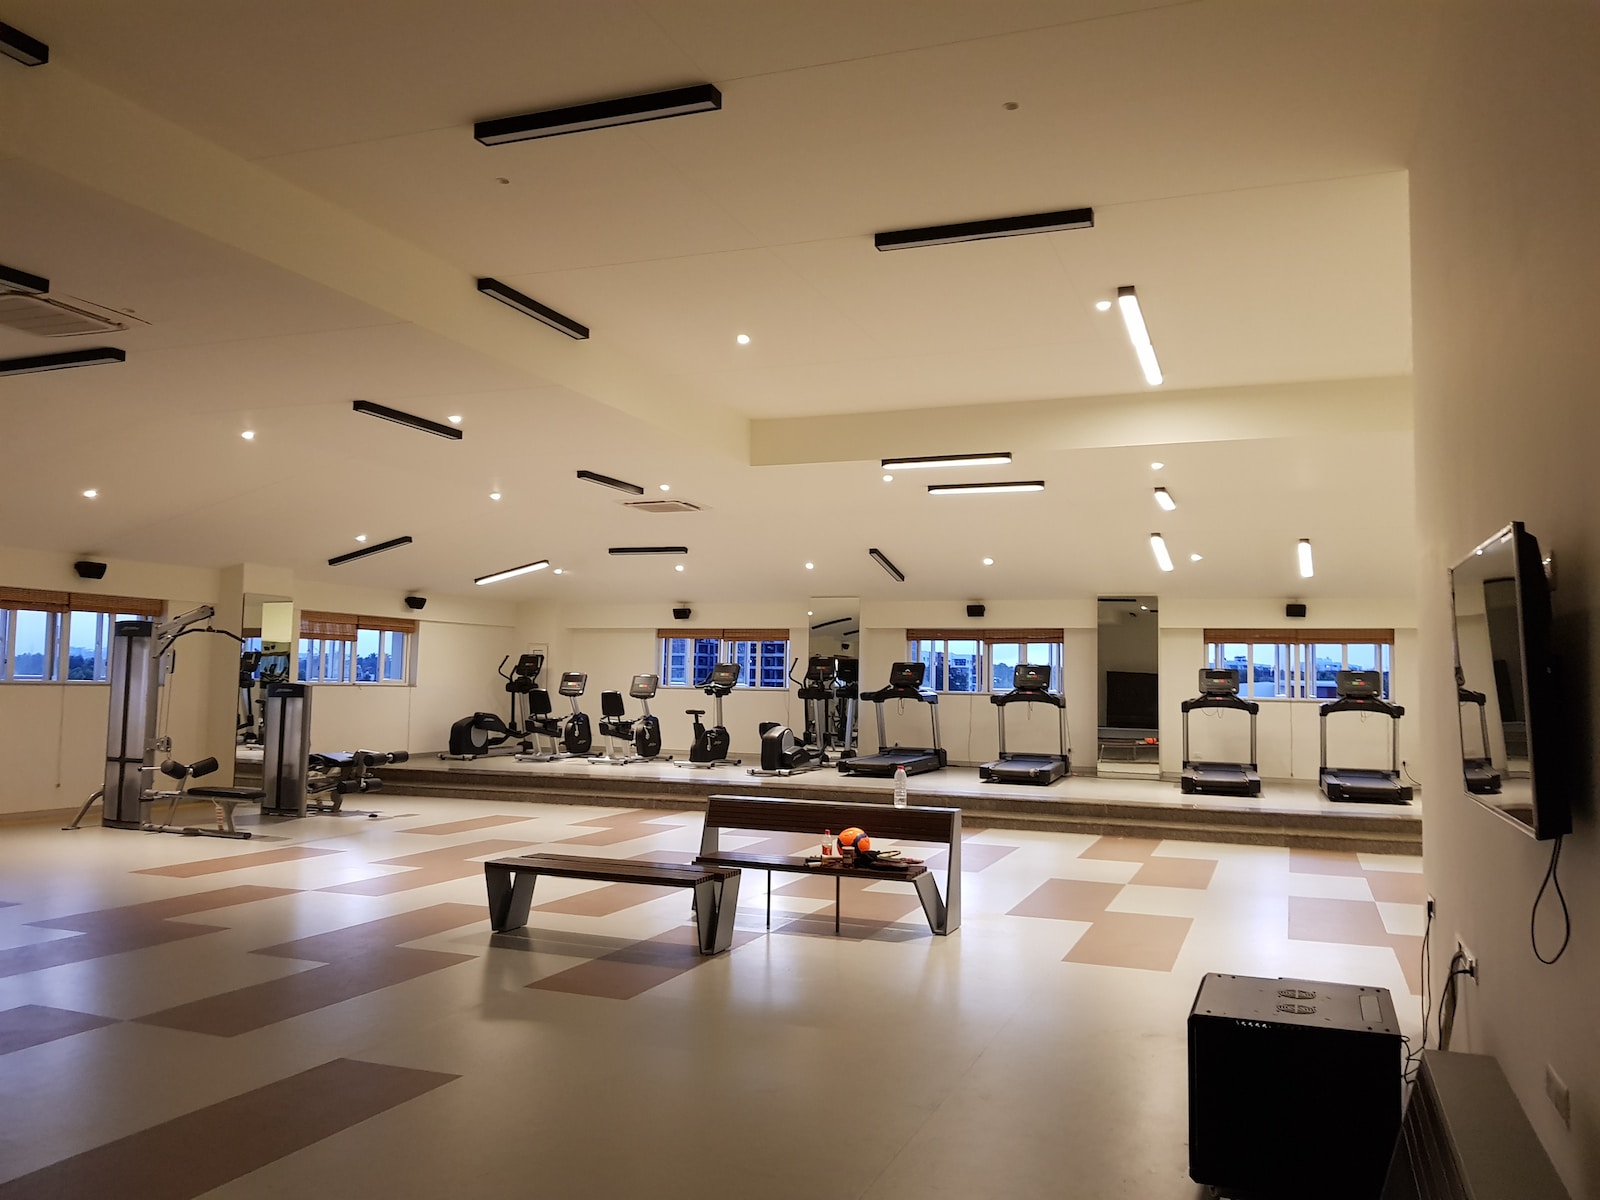 Fitness clubs that provide services for physical exercises.